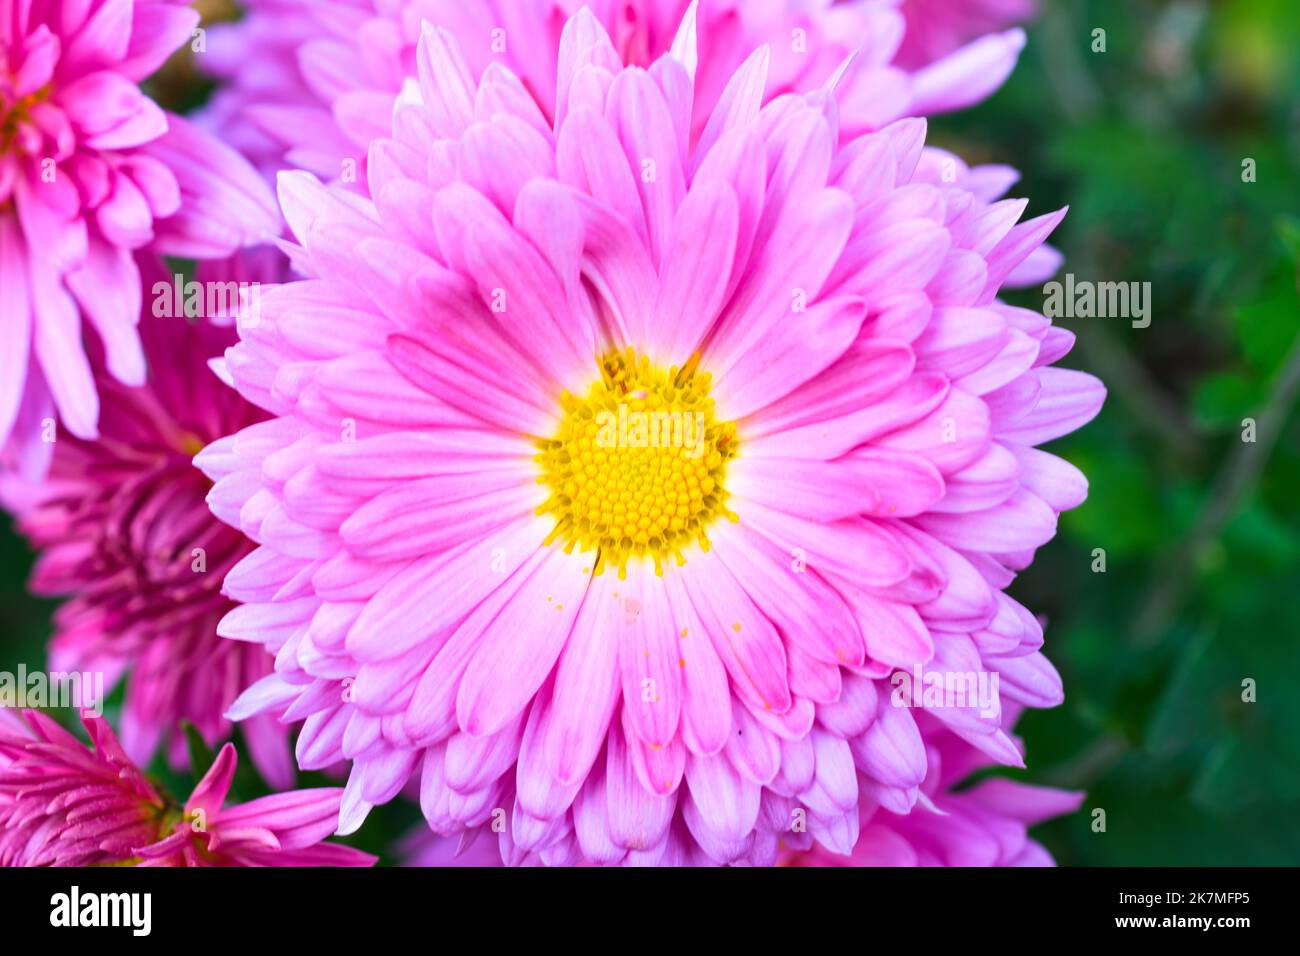 China aster pink and yellow flower, close-up Stock Photo